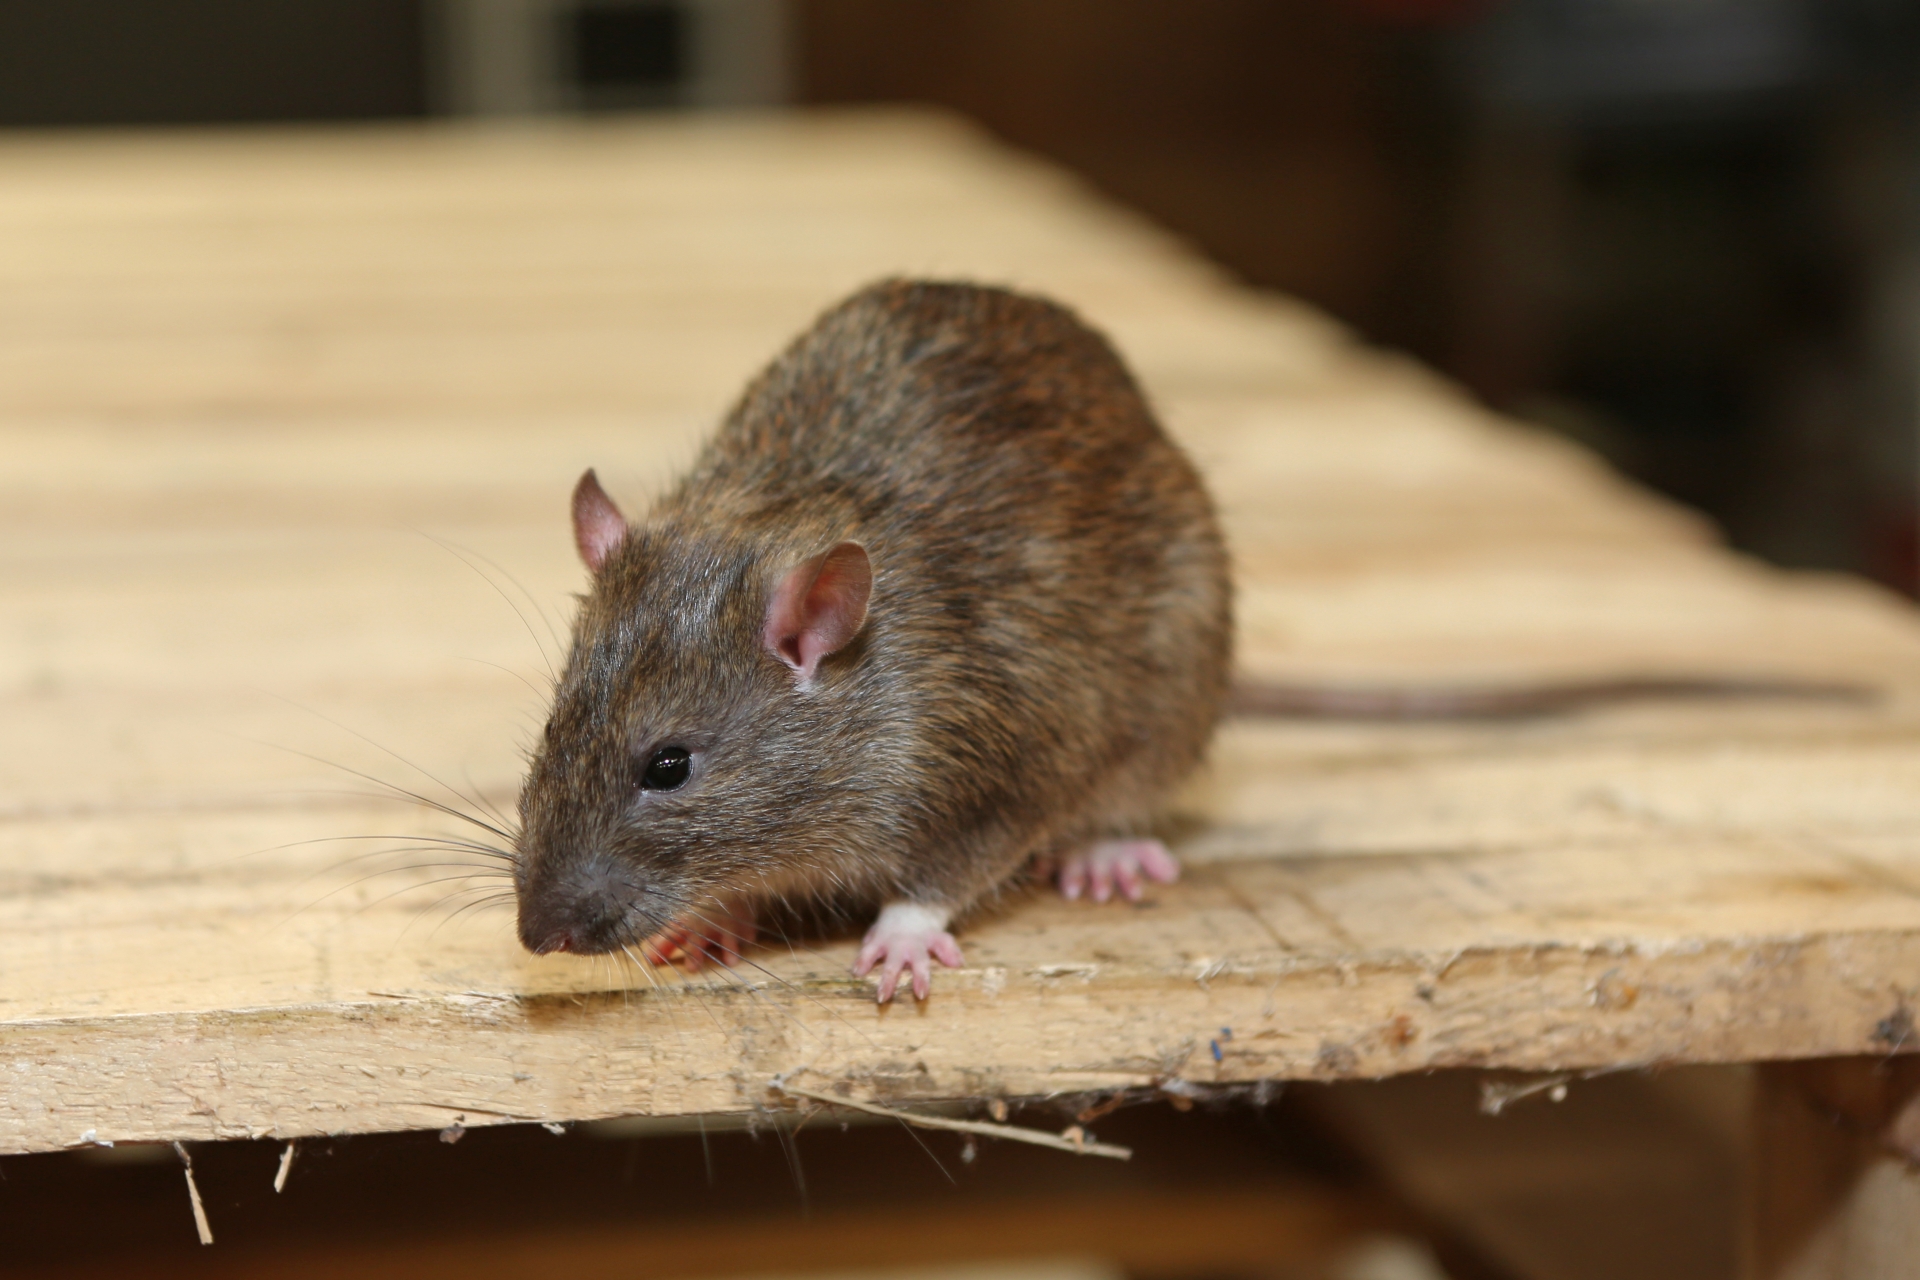 Rat extermination, Pest Control in Headley, KT18. Call Now 020 8166 9746